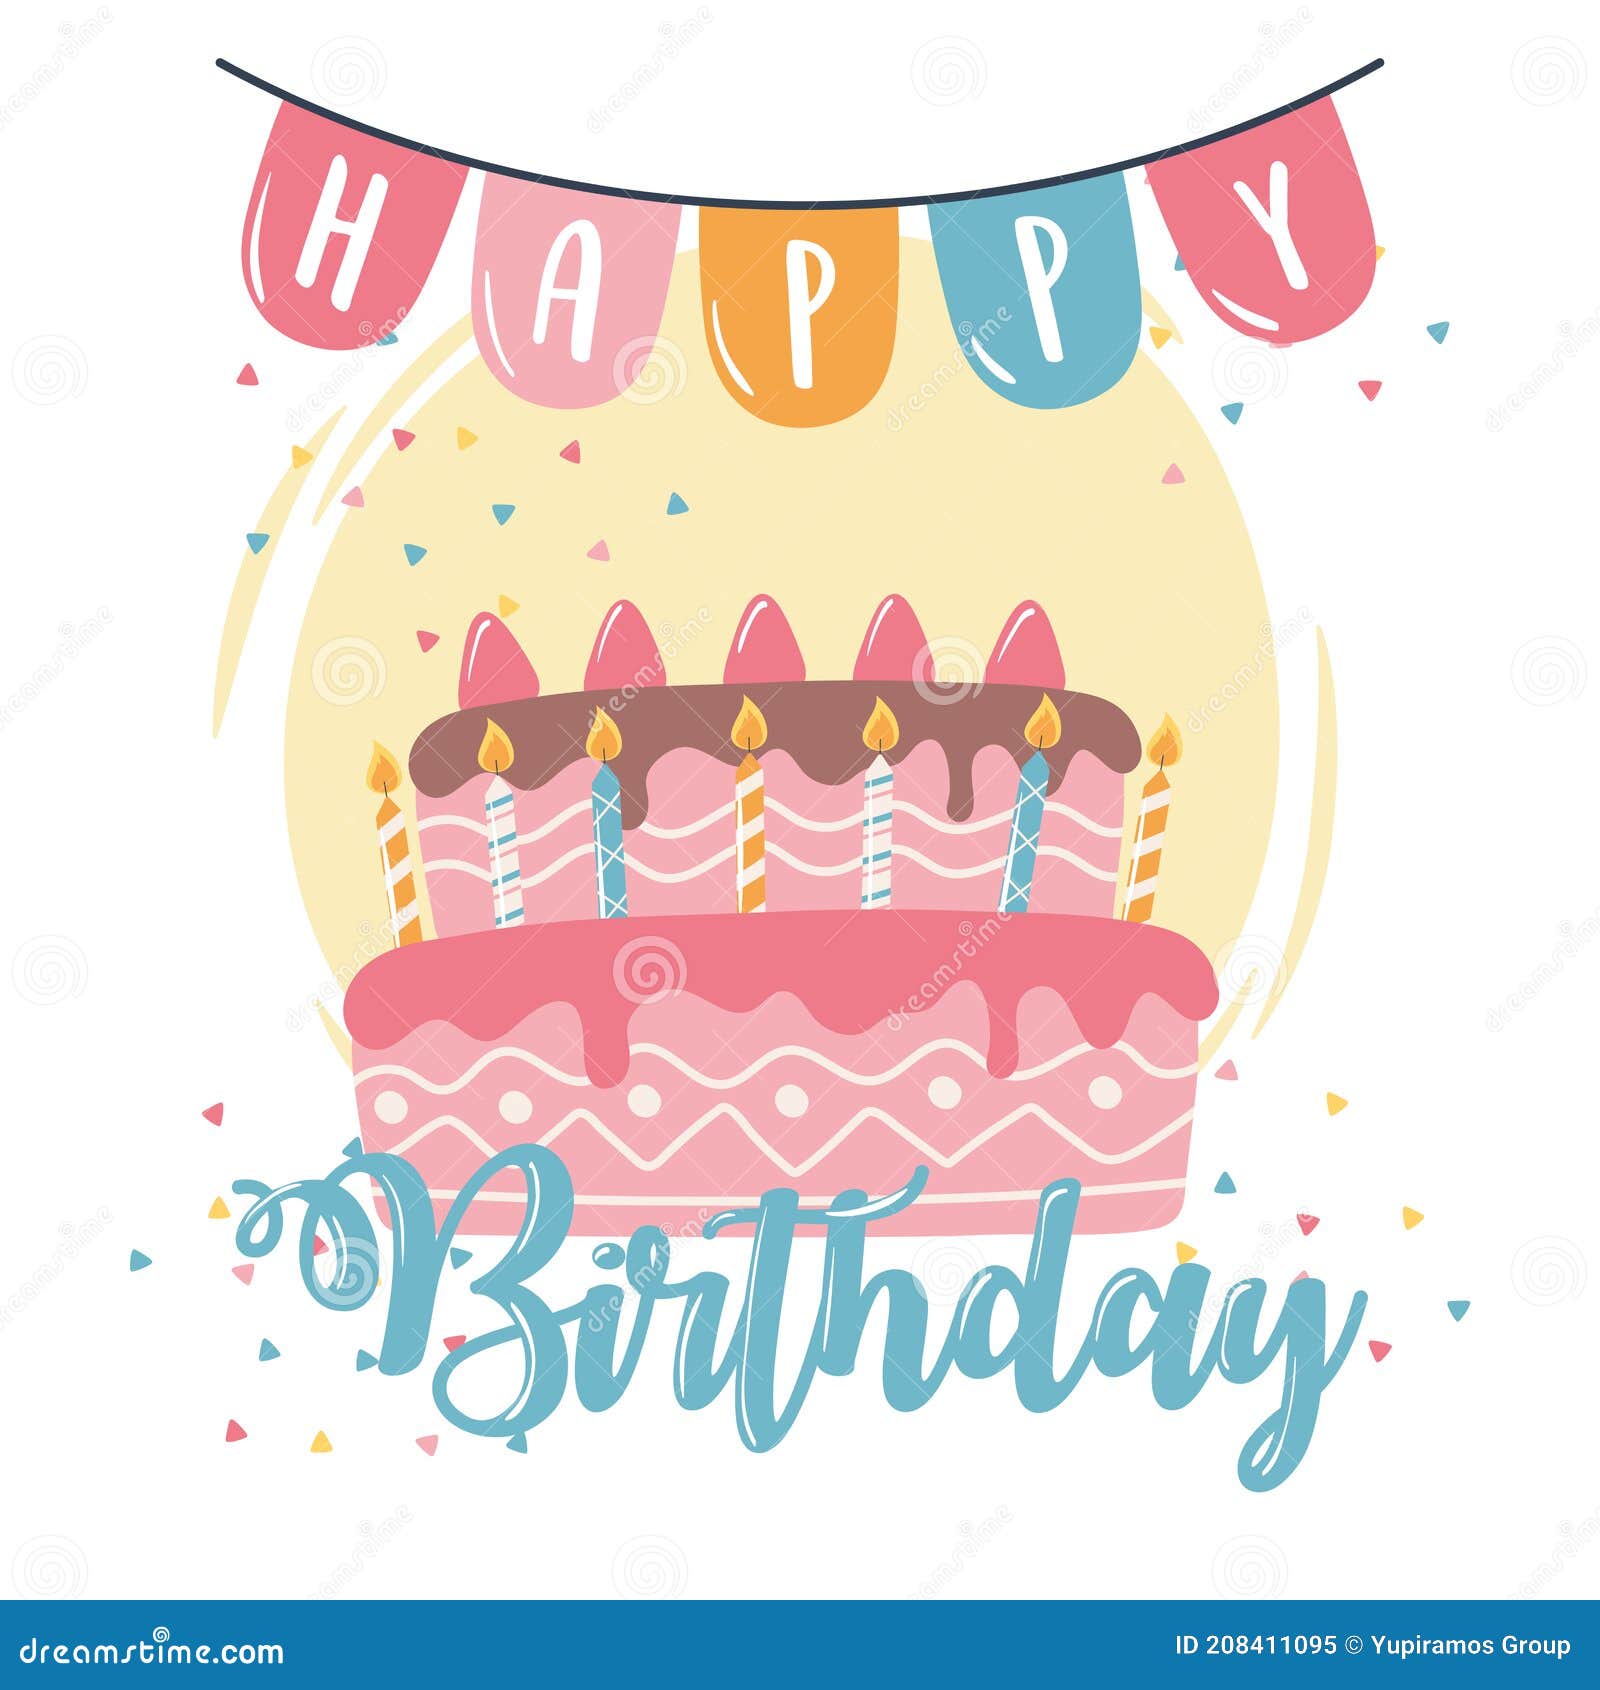 Happy Birthday Cake Candles and Pennants Celebration Party Cartoon ...